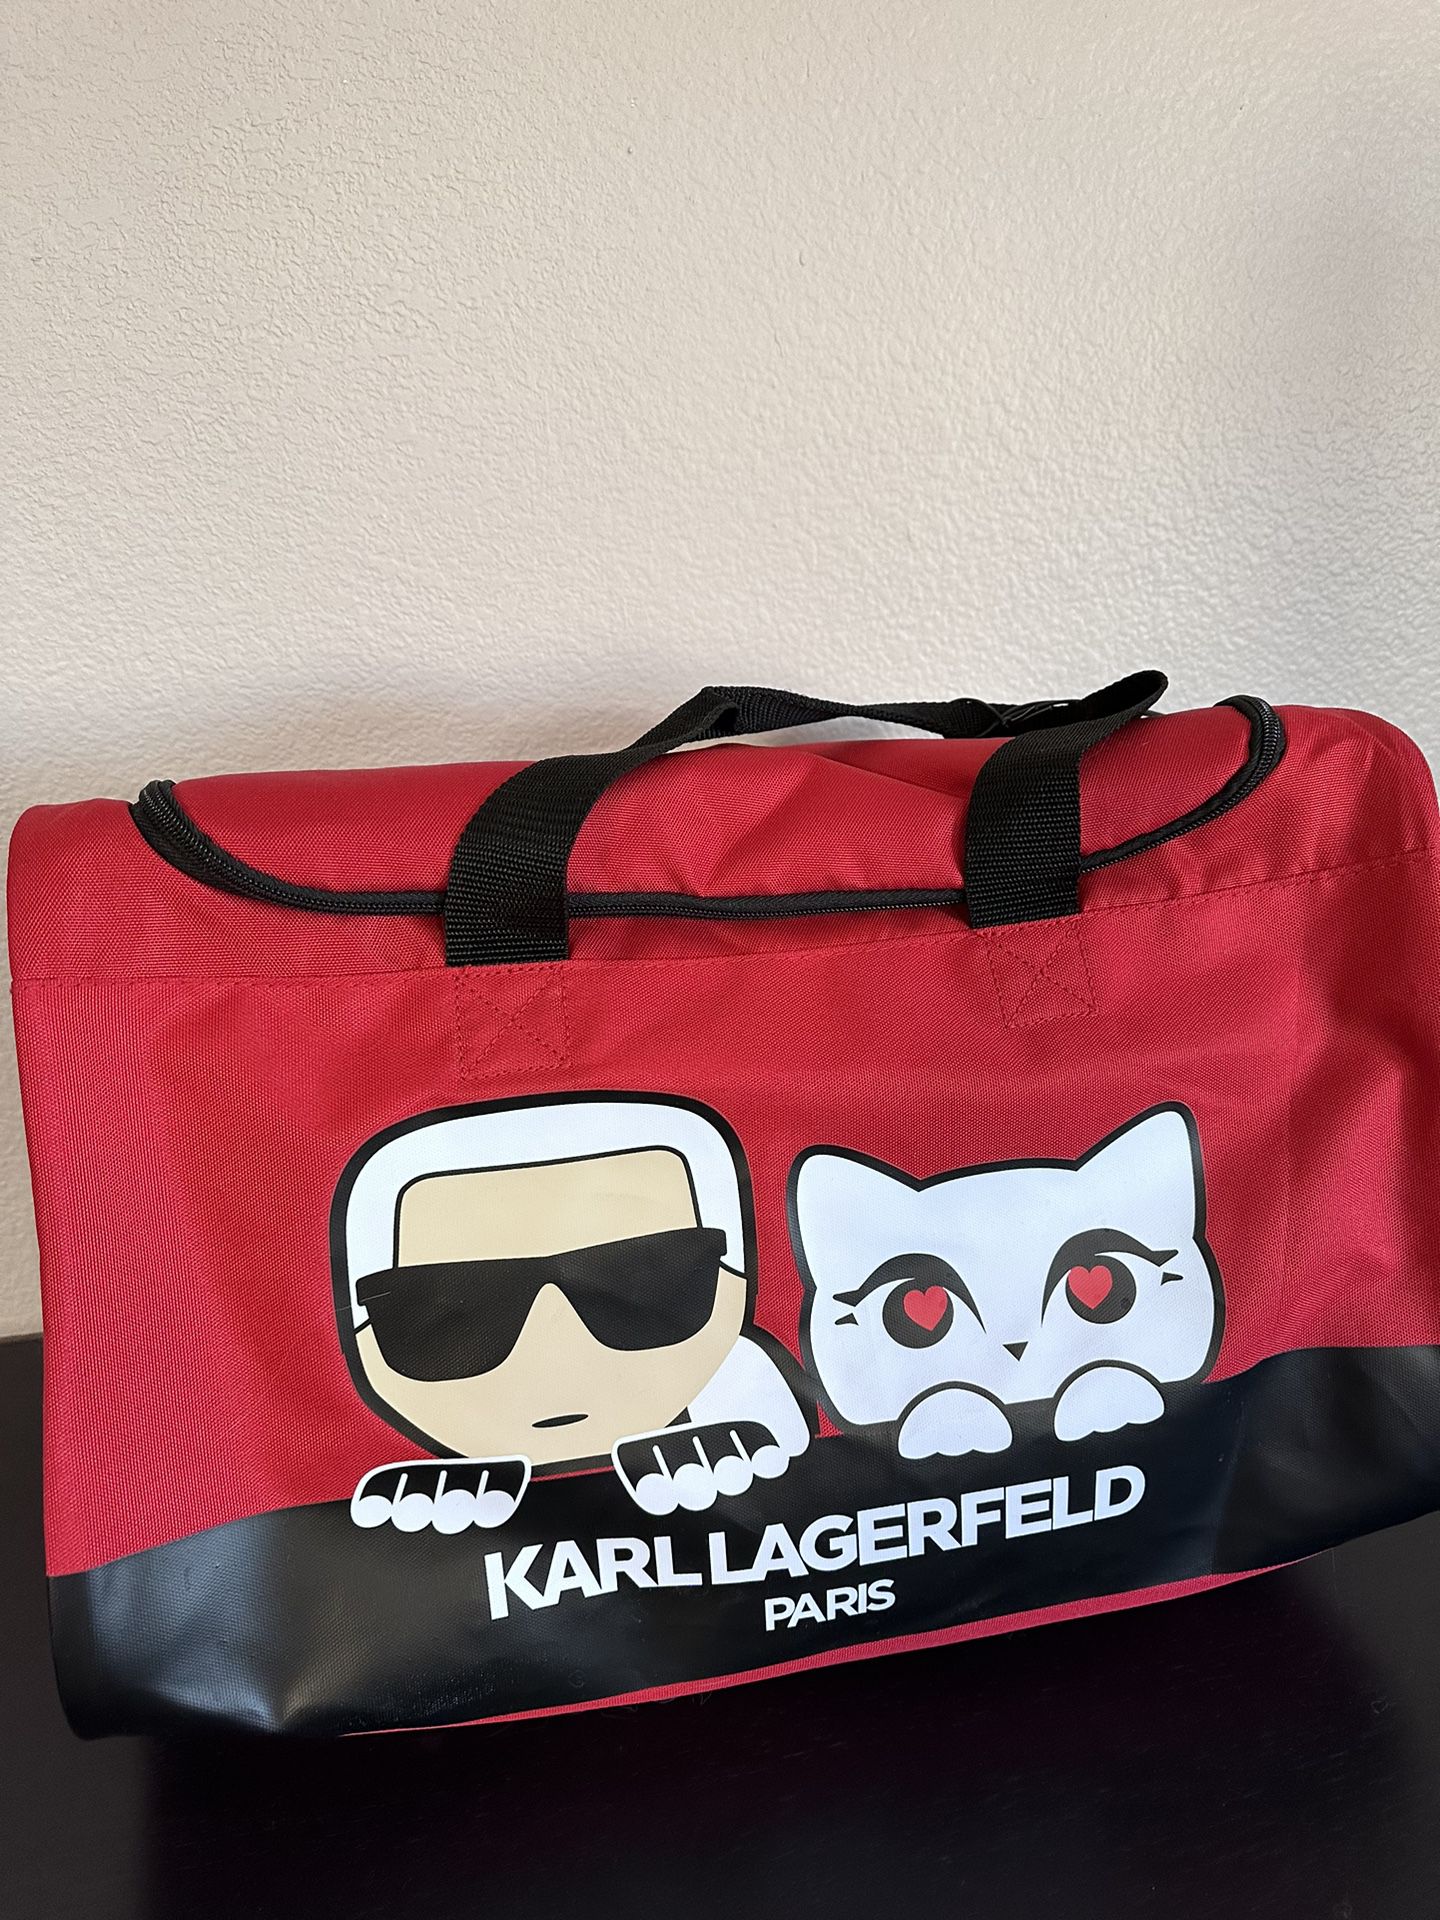 Karl Lagerfeld Paris Gym Duffle Bag Luggage Red KARL & KITTY Cat Polyester  Rare for Sale in Las Vegas, NV - OfferUp